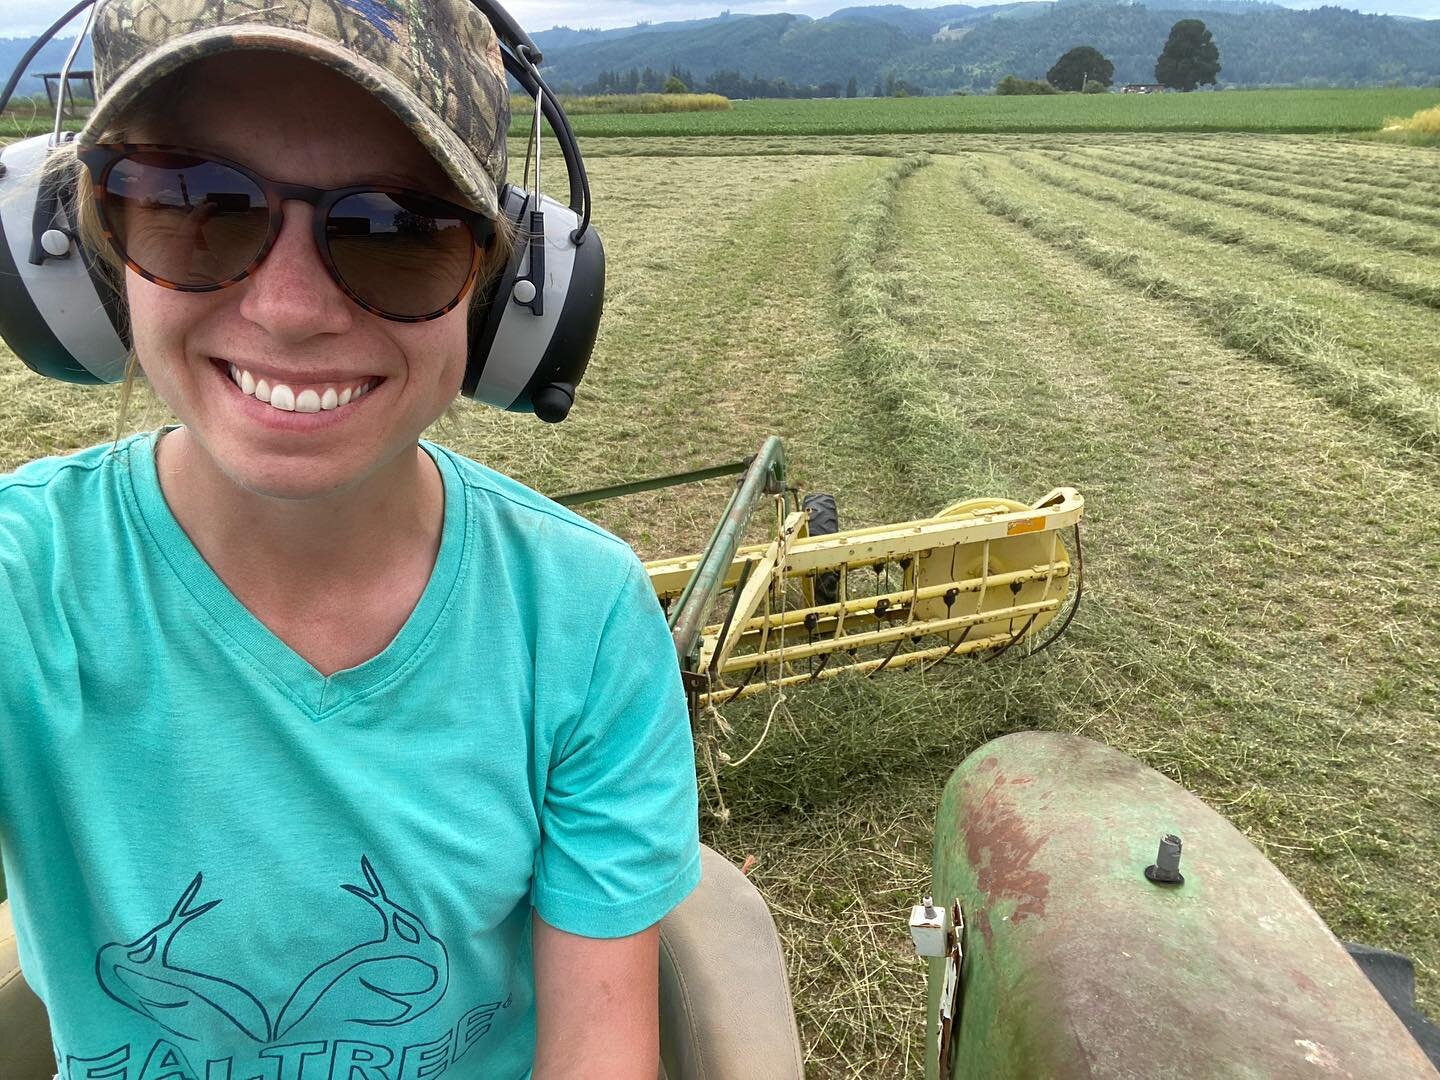 This spring weather has me seriously itching for farming to begin. 

2020 was a rough year for hay. Between summer rains and the awful wildfires that blocked out the sun and caused our freshly cut hay to rot, it was a year of struggles. I&rsquo;m hop